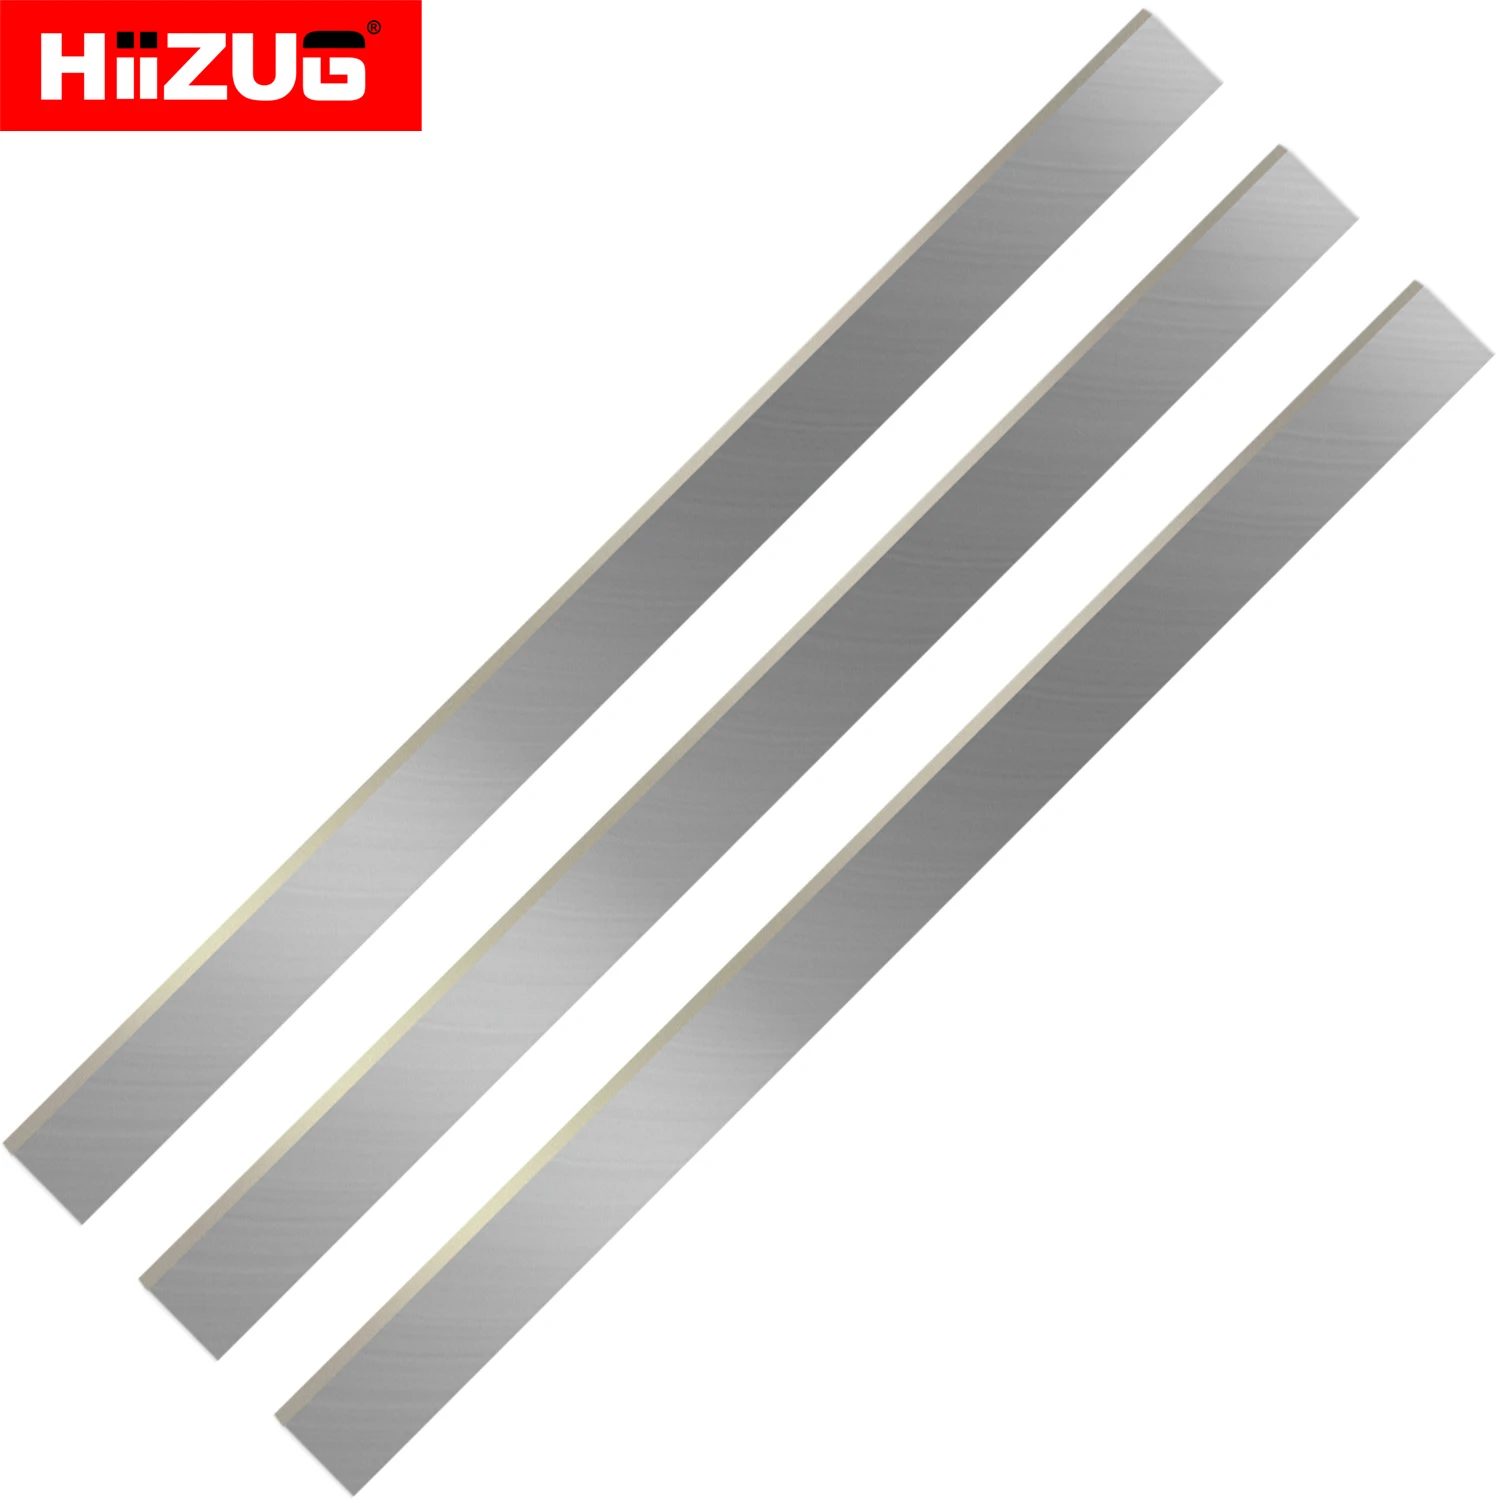 483×25×3mm Planer Blades Knife for 19''  Cutter Heads of Electric Thicknesser Planer Jointer  HSS TCT Set of 3 Pieces